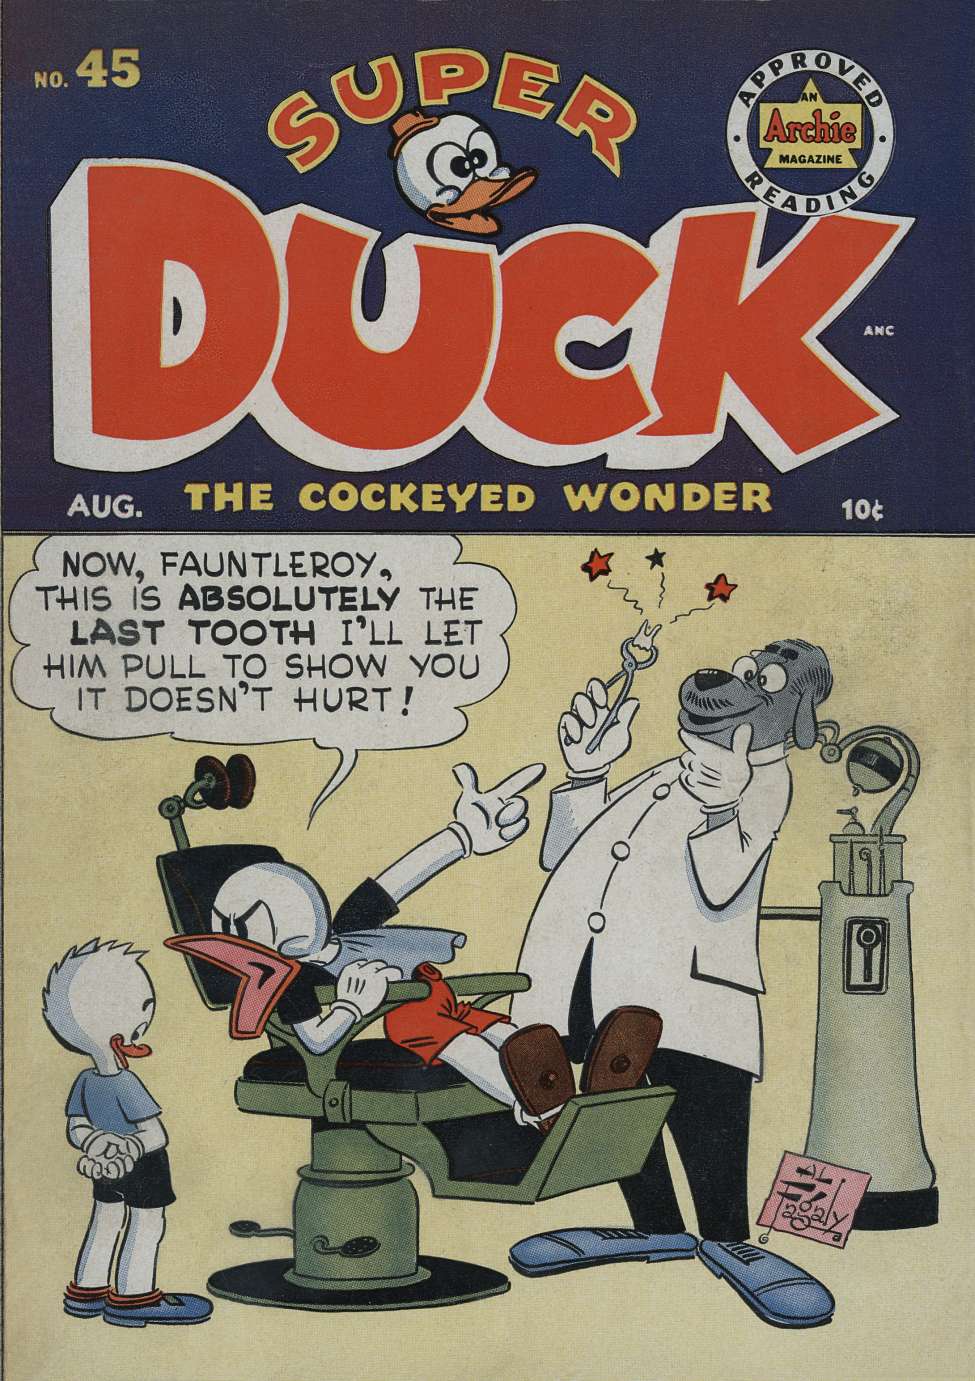 Book Cover For Super Duck 45 - Version 2